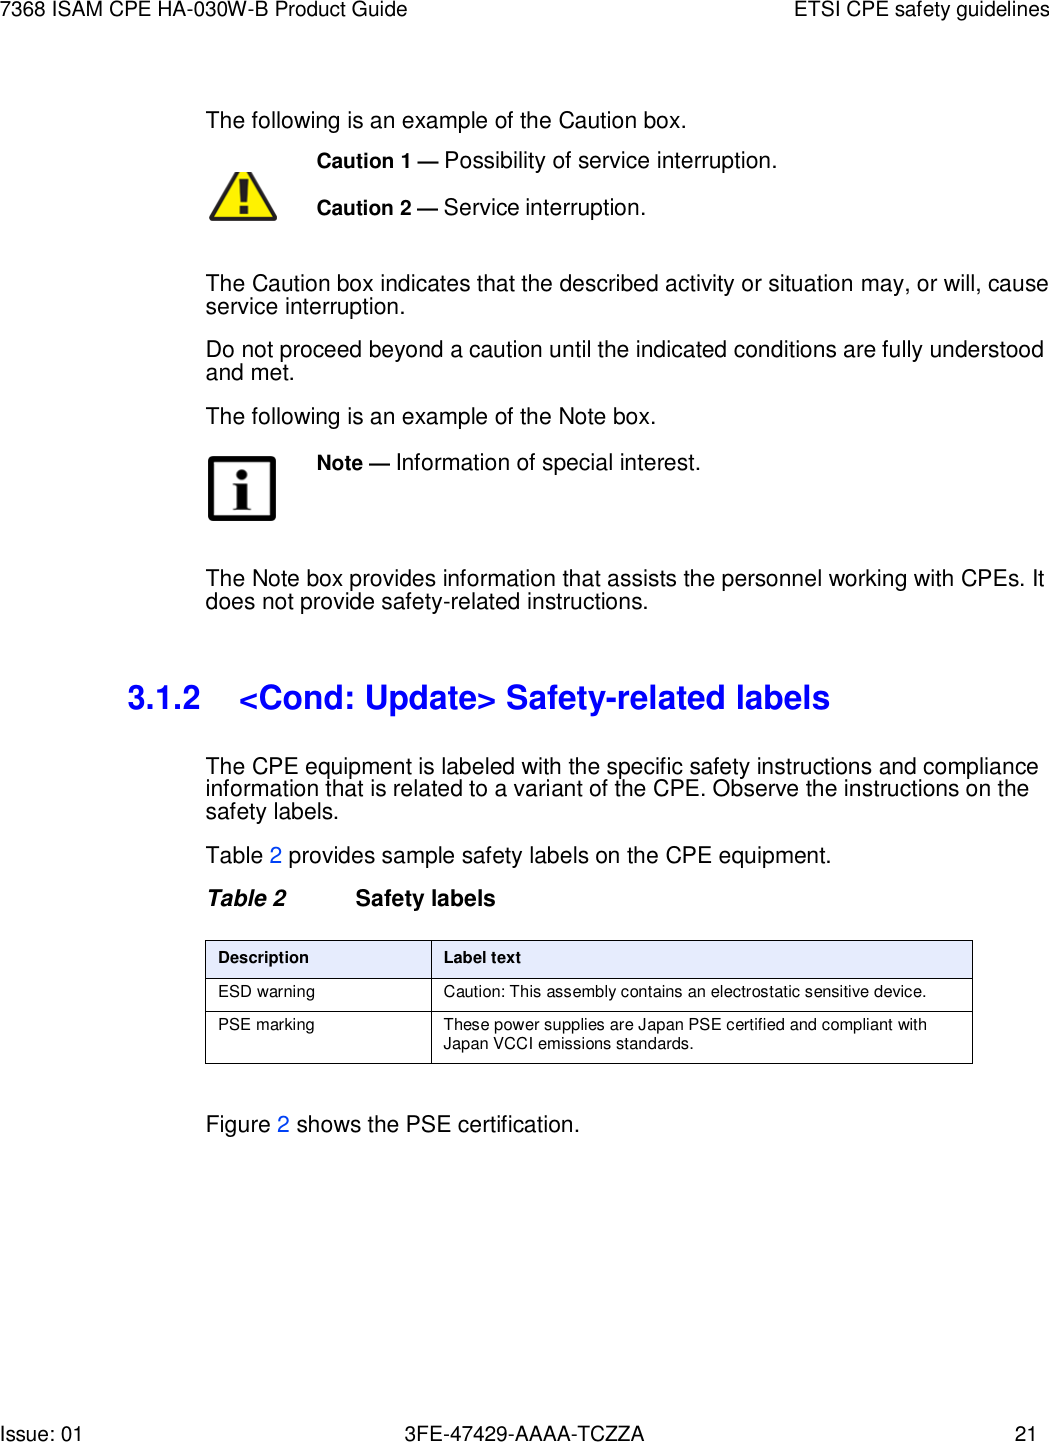 Issue: 01 3FE-47429-AAAA-TCZZA 21 7368 ISAM CPE HA-030W-B Product Guide ETSI CPE safety guidelines    The following is an example of the Caution box. Caution 1 — Possibility of service interruption.         Caution 2 — Service interruption. The Caution box indicates that the described activity or situation may, or will, cause service interruption. Do not proceed beyond a caution until the indicated conditions are fully understood and met. The following is an example of the Note box. Note — Information of special interest.    The Note box provides information that assists the personnel working with CPEs. It does not provide safety-related instructions.   3.1.2 &lt;Cond: Update&gt; Safety-related labels  The CPE equipment is labeled with the specific safety instructions and compliance information that is related to a variant of the CPE. Observe the instructions on the safety labels. Table 2 provides sample safety labels on the CPE equipment. Table 2  Safety labels  Description Label text ESD warning Caution: This assembly contains an electrostatic sensitive device. PSE marking These power supplies are Japan PSE certified and compliant with Japan VCCI emissions standards.  Figure 2 shows the PSE certification. 